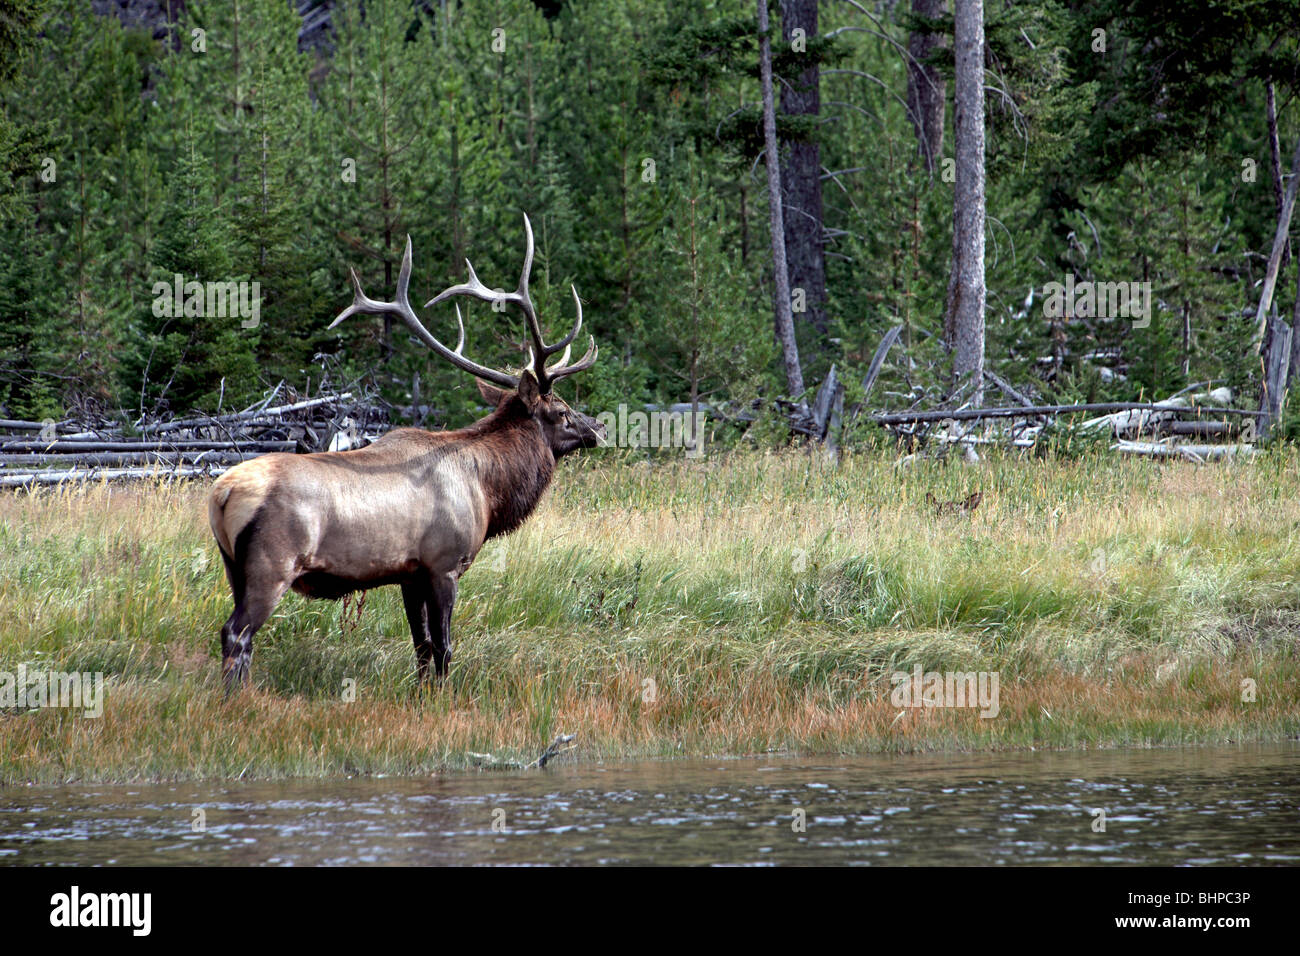 Bull Elk watches over his harem herd of females along river and forest in Yellowstone national park, Wyoming. Stock Photo